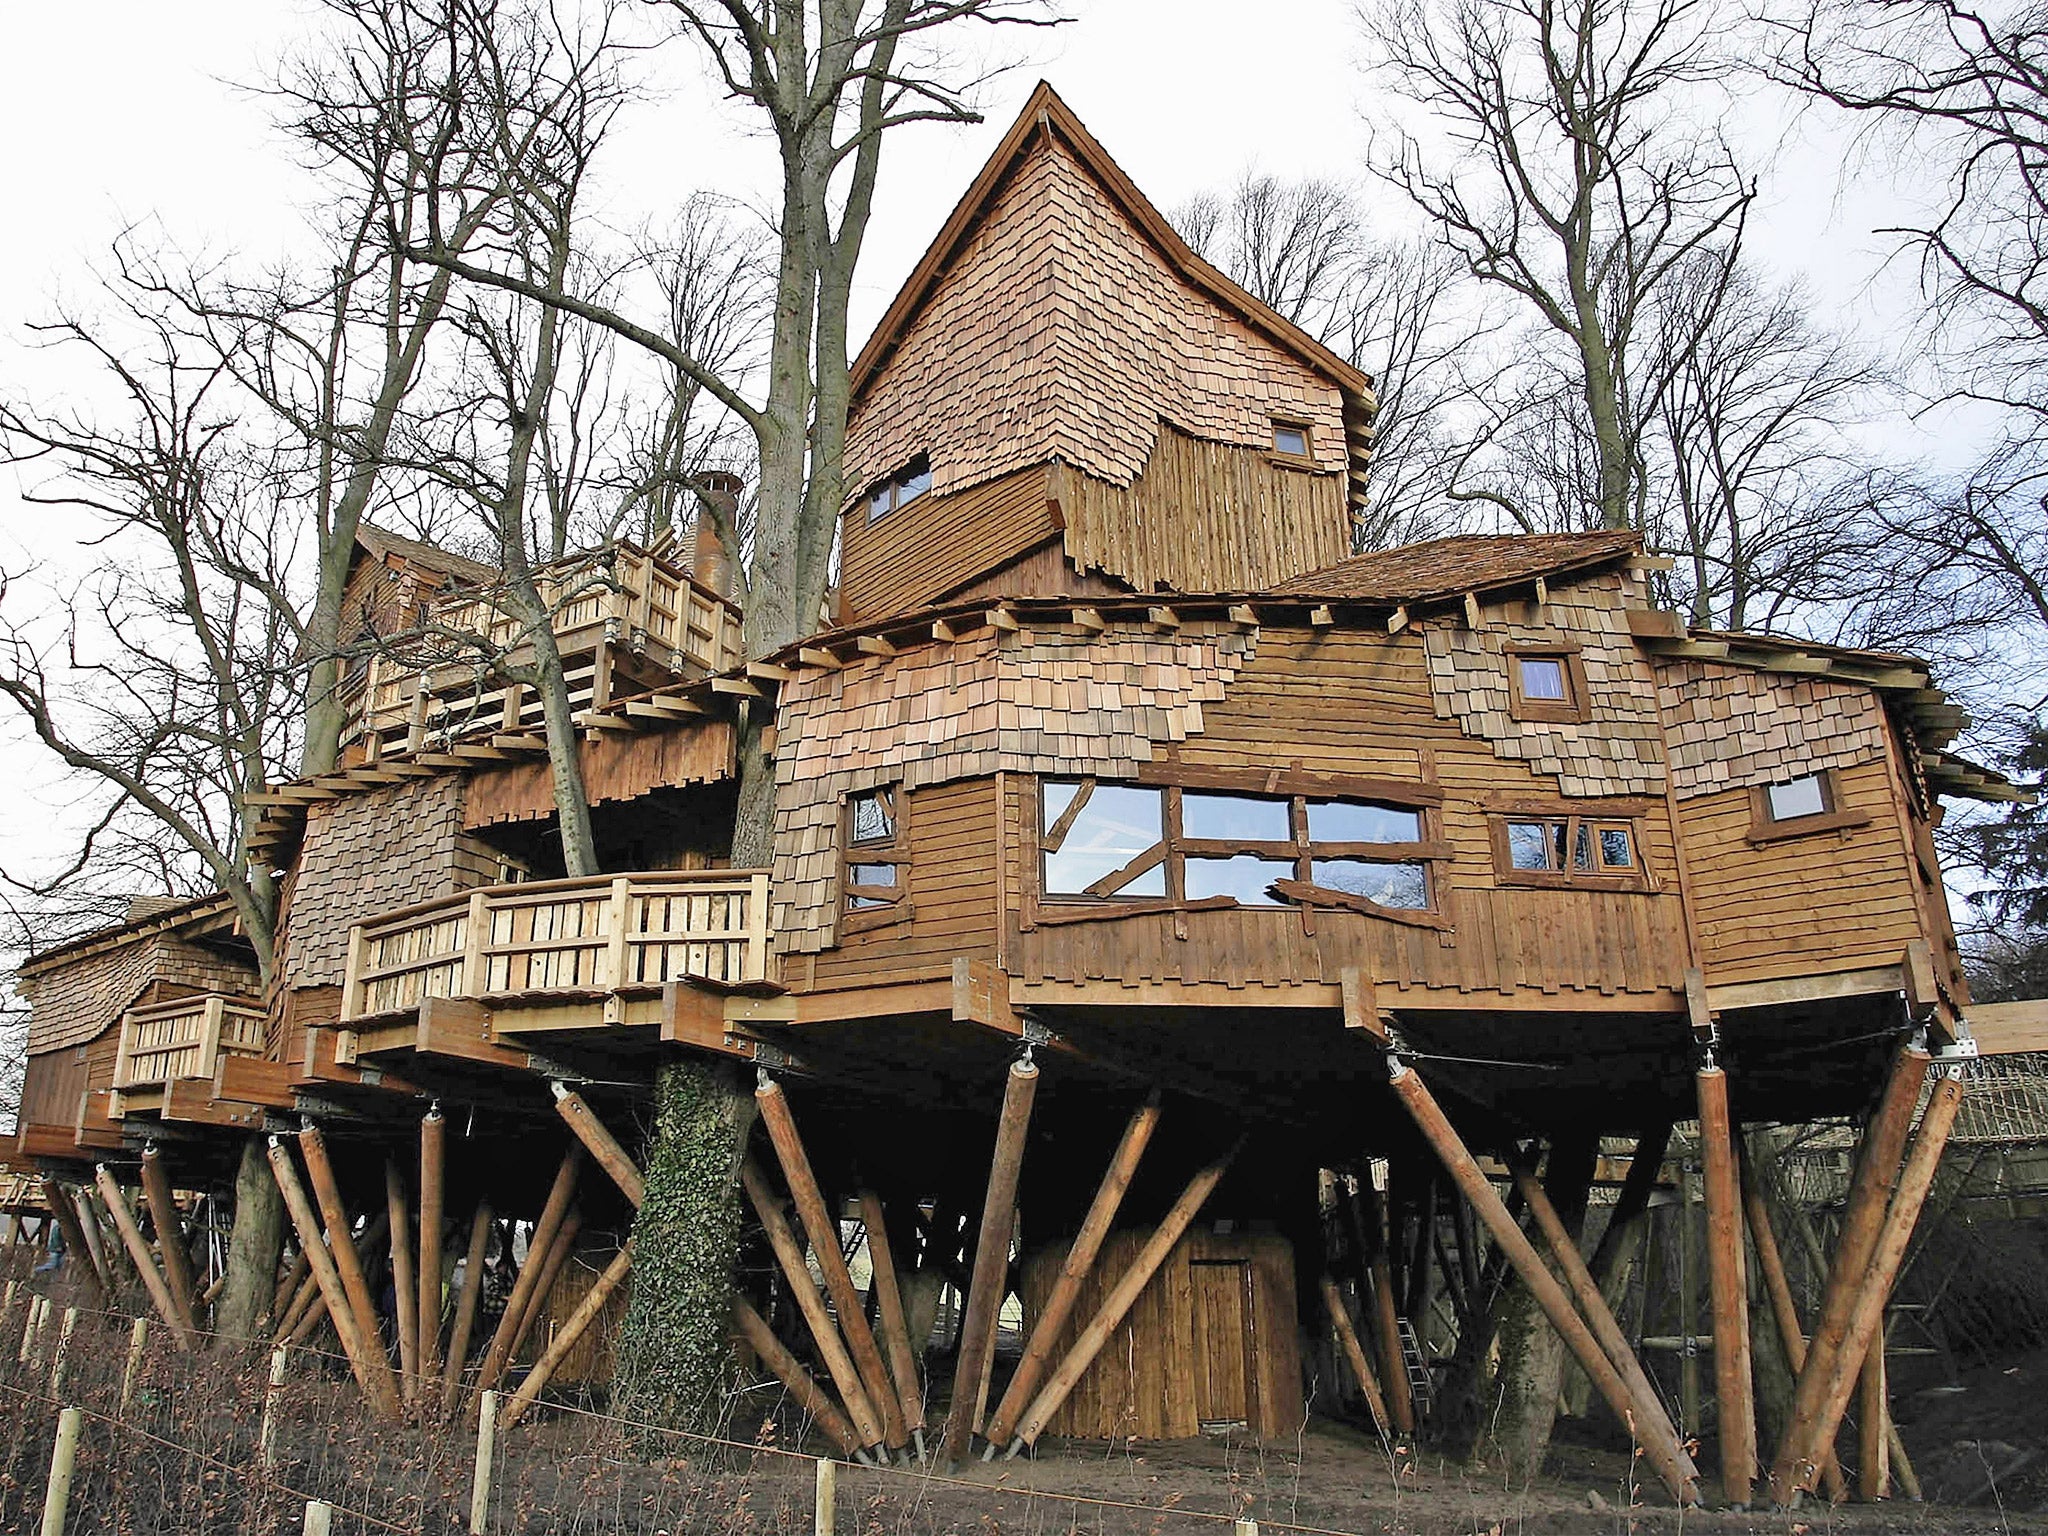 The treehouse at Alnwick Garden is built between 16 giant lime trees and towers 60ft in the air